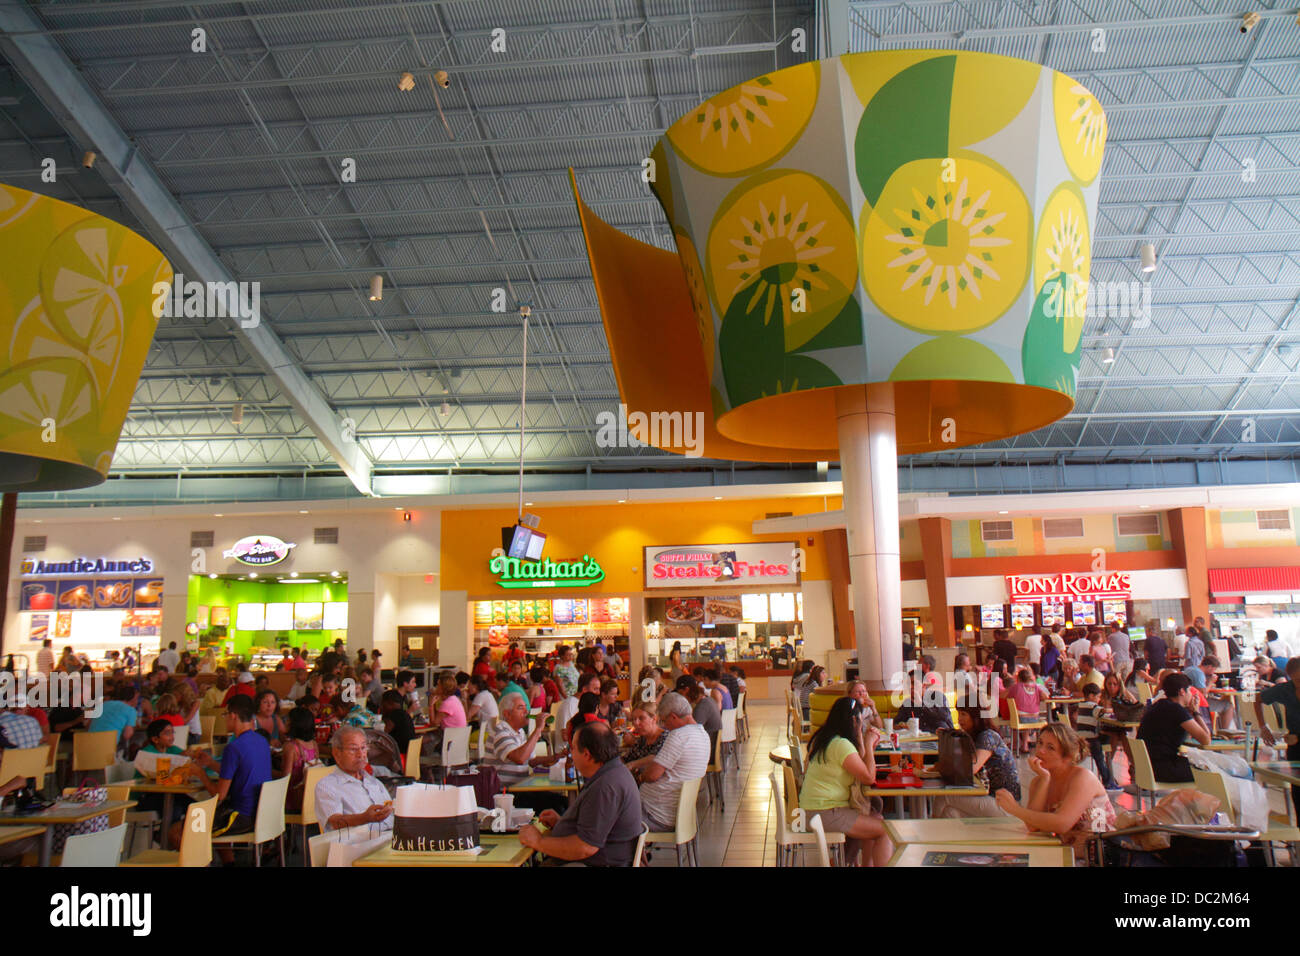 Sawgrass Mills in Fort Lauderdale - Tours and Activities